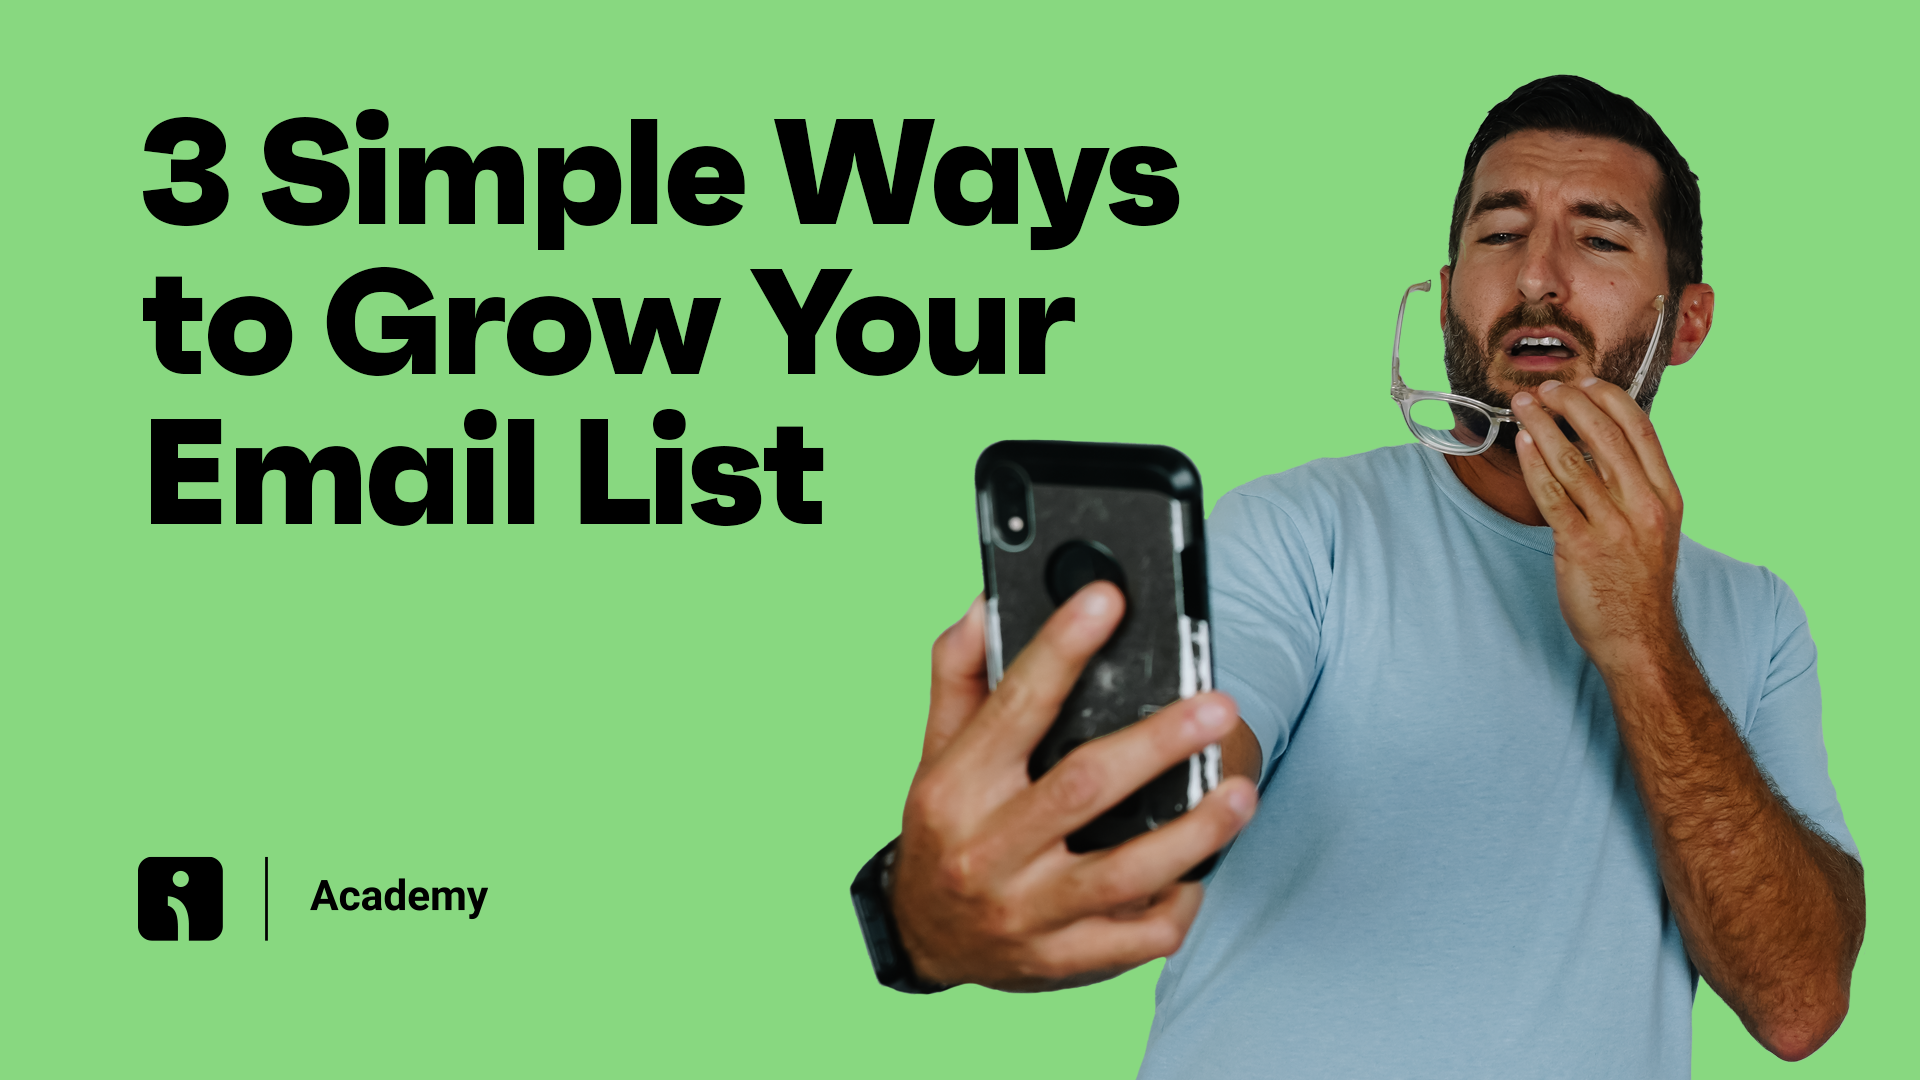 3 Simple Ways to Grow Your Email List